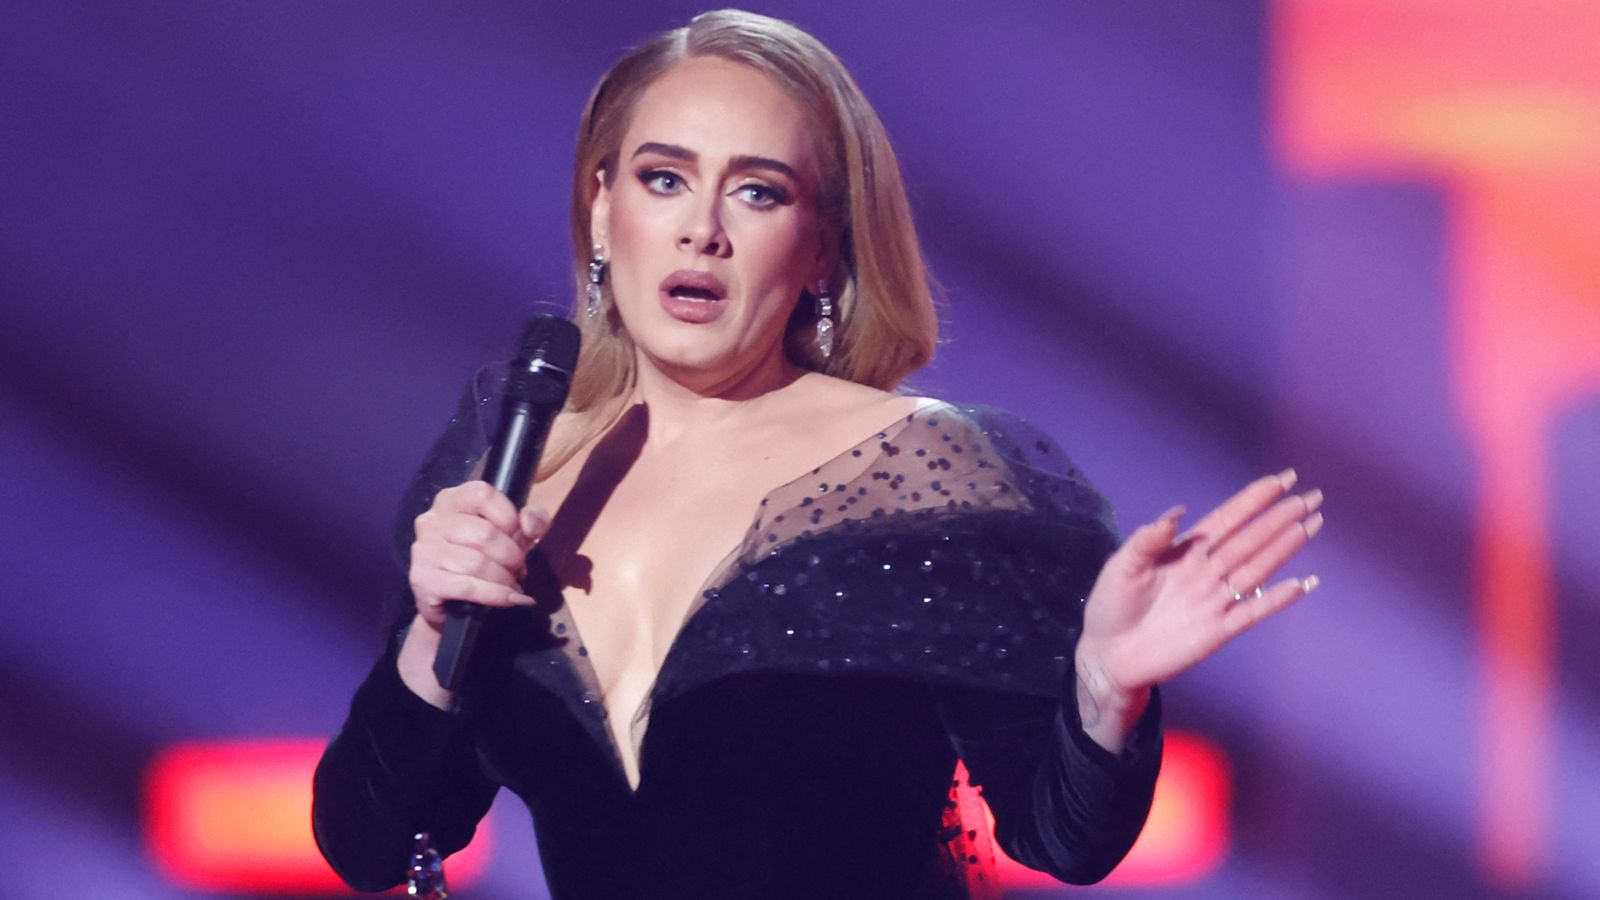 Adele reveals nerves ahead of opening night of rescheduled Vegas residency: 'I feel a million miles away from home'